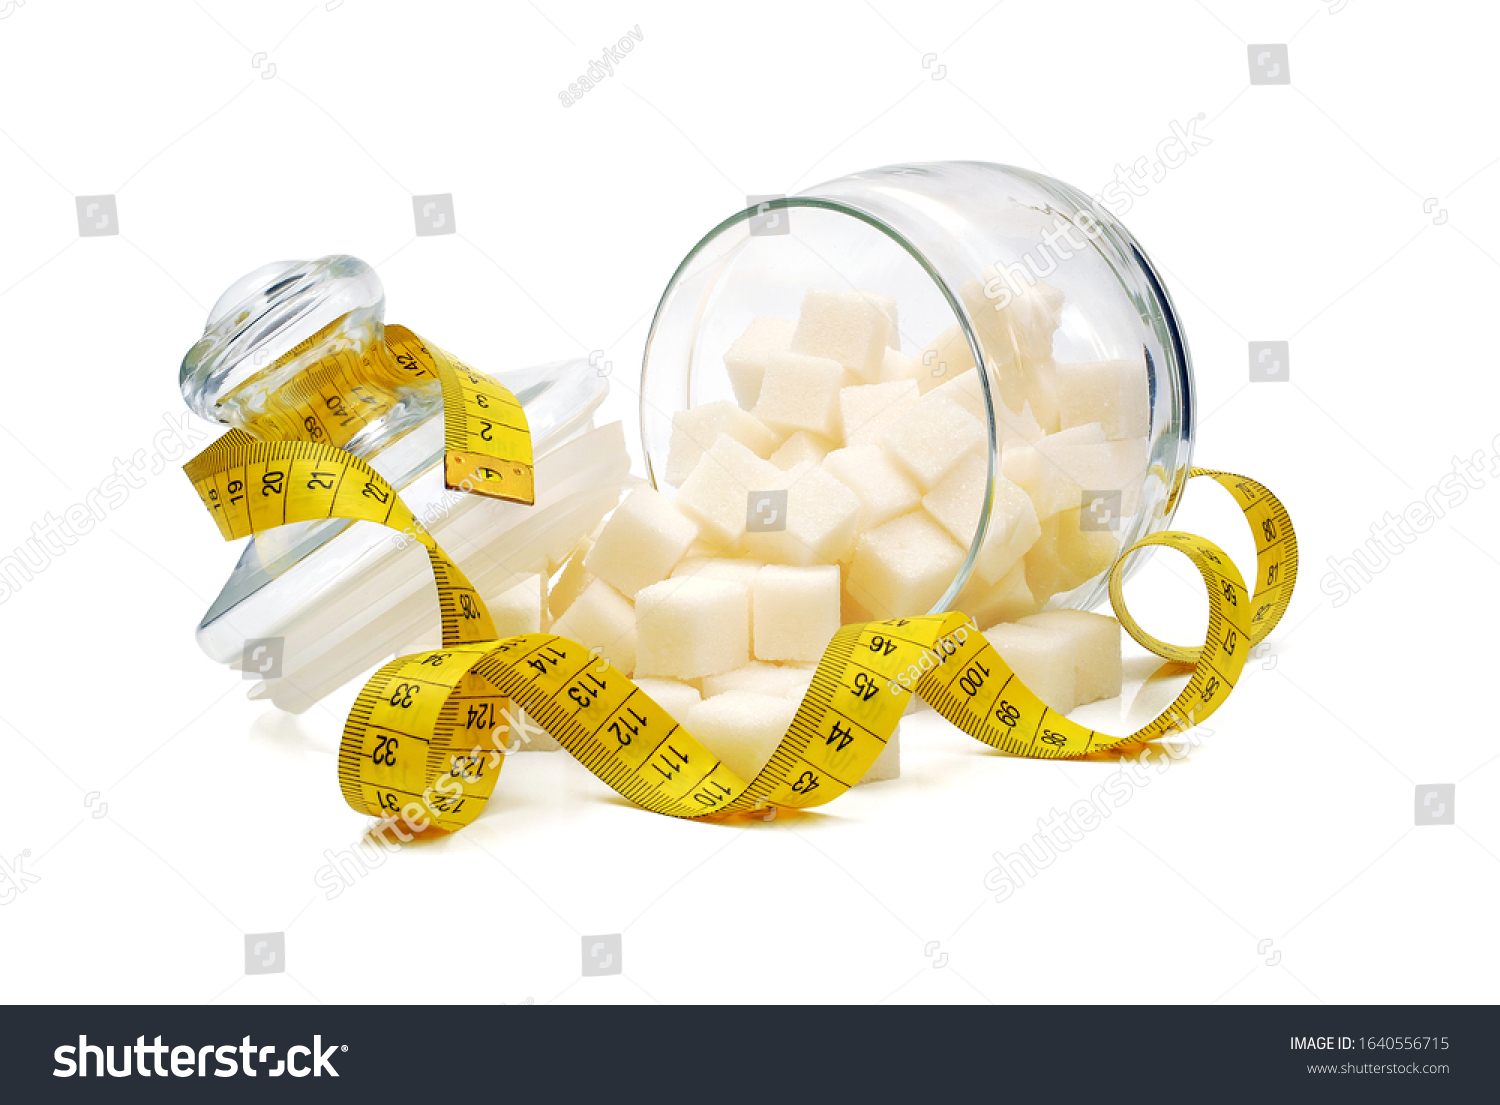 sugar cubes spilled from overturned glass sugar bowl and wrapped by tape measure isolated on white background #1640556715